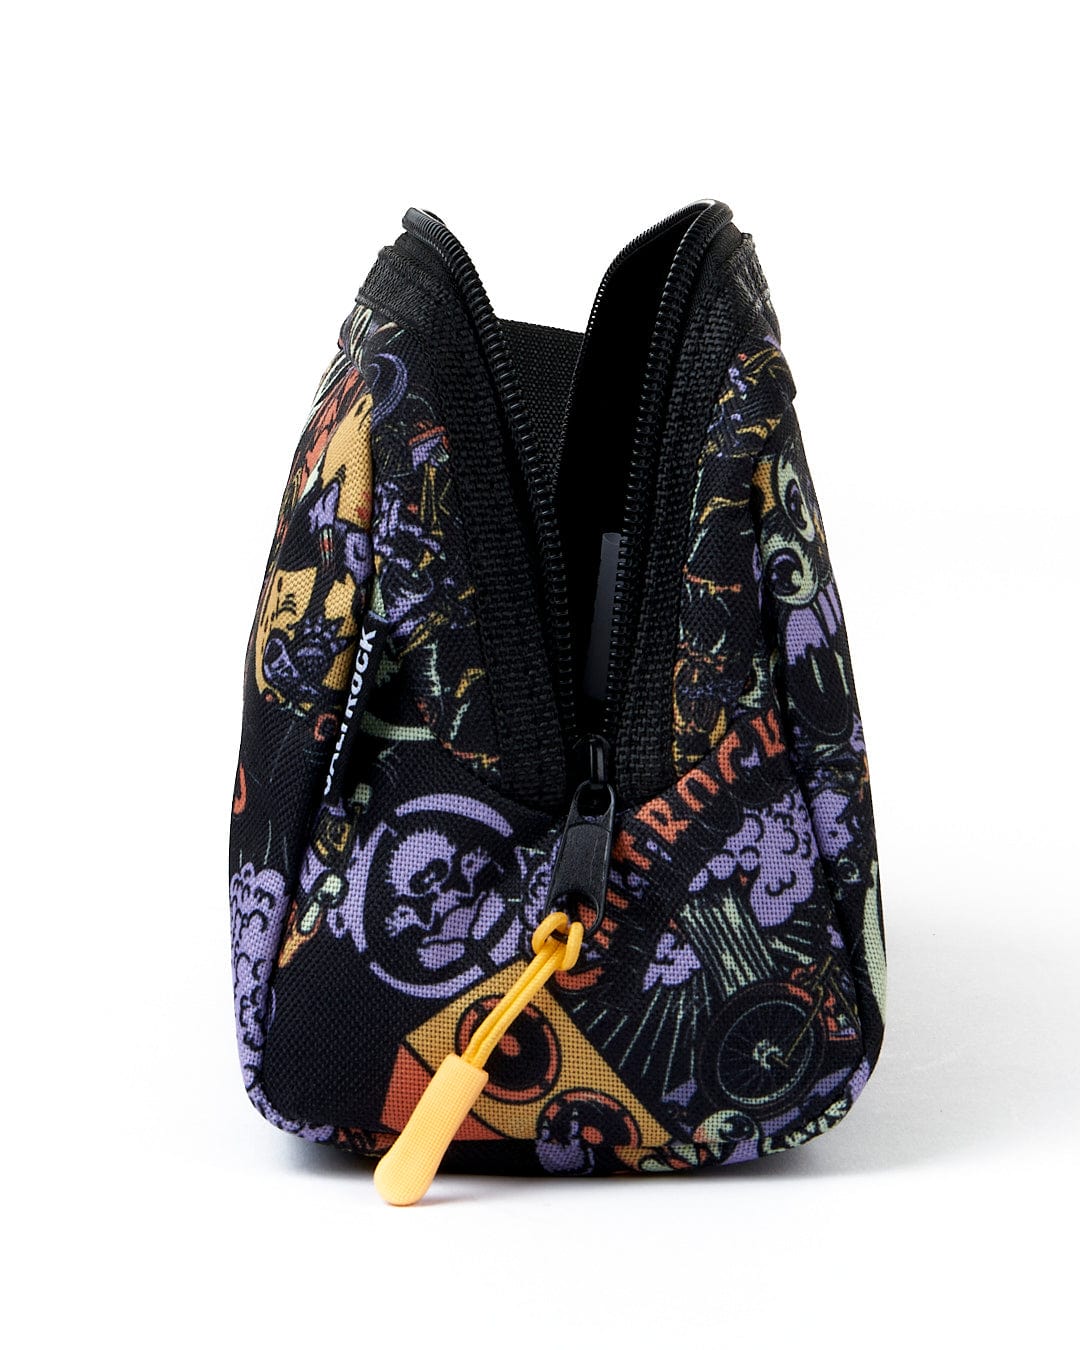 A Creeper Crew - Pencil Case - Black with a skull and crossbones design, sold by Saltrock.